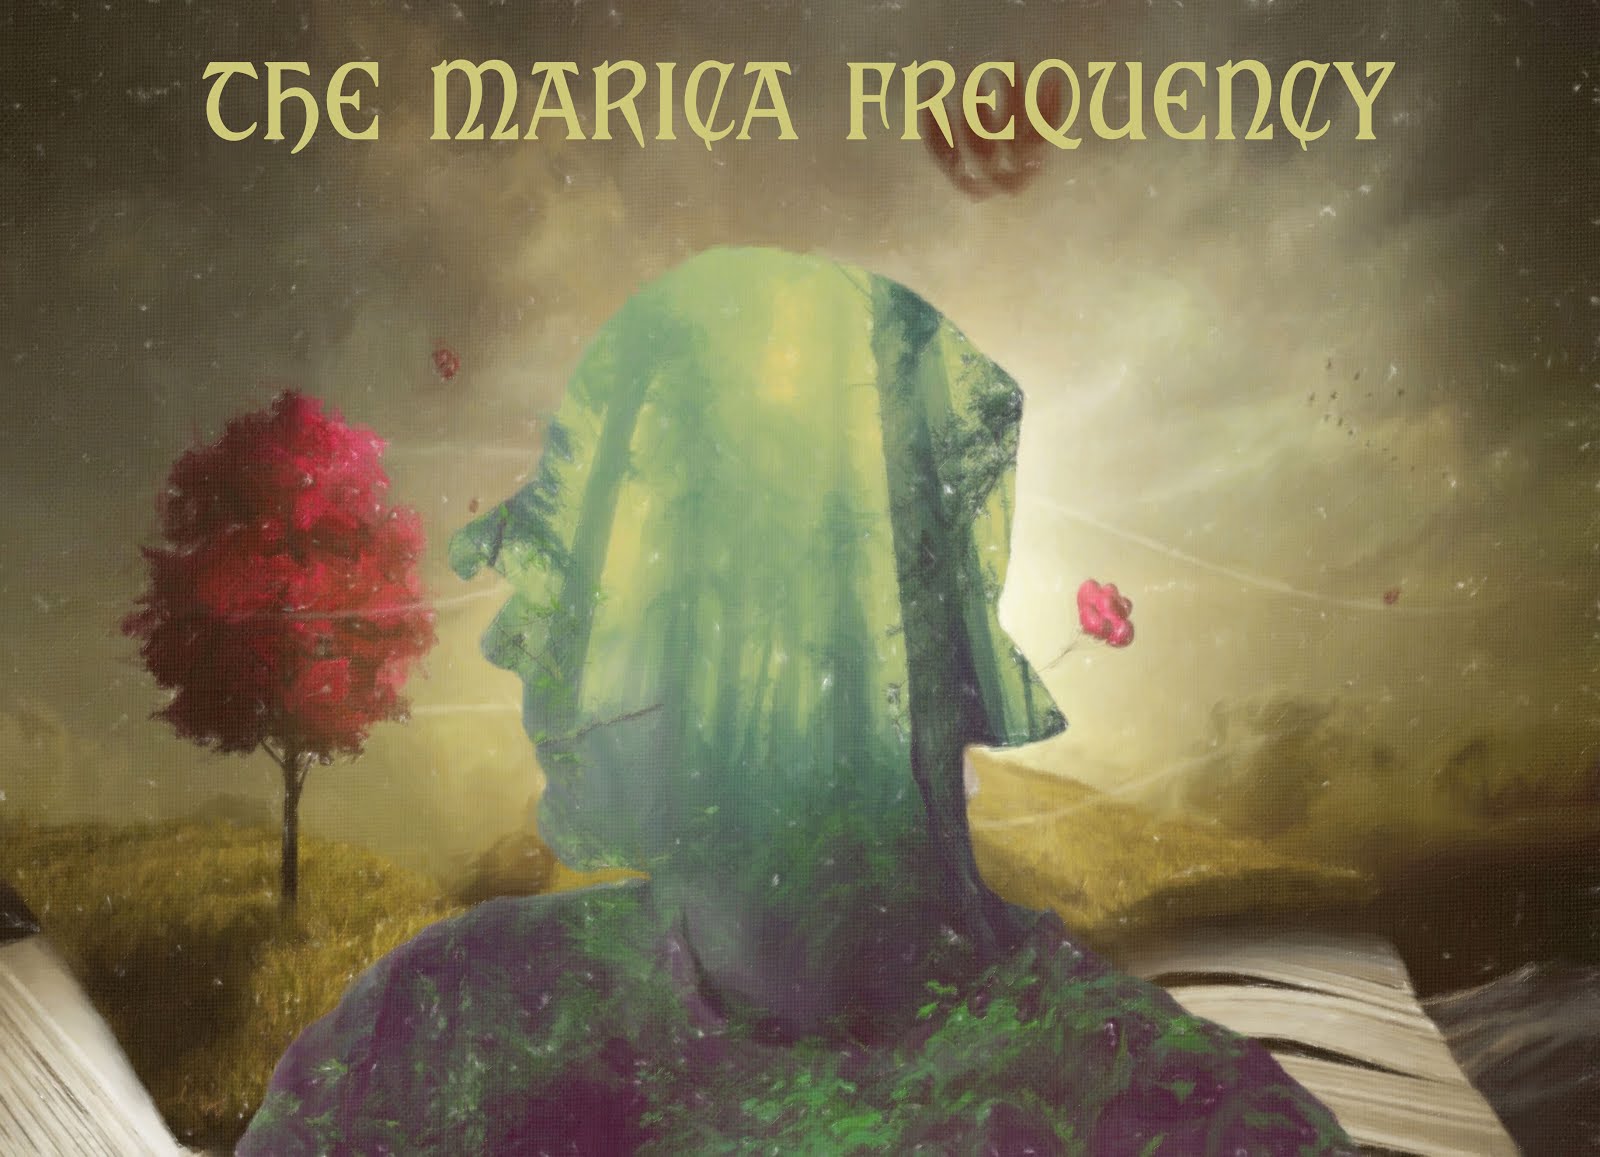 The Marica Frequency